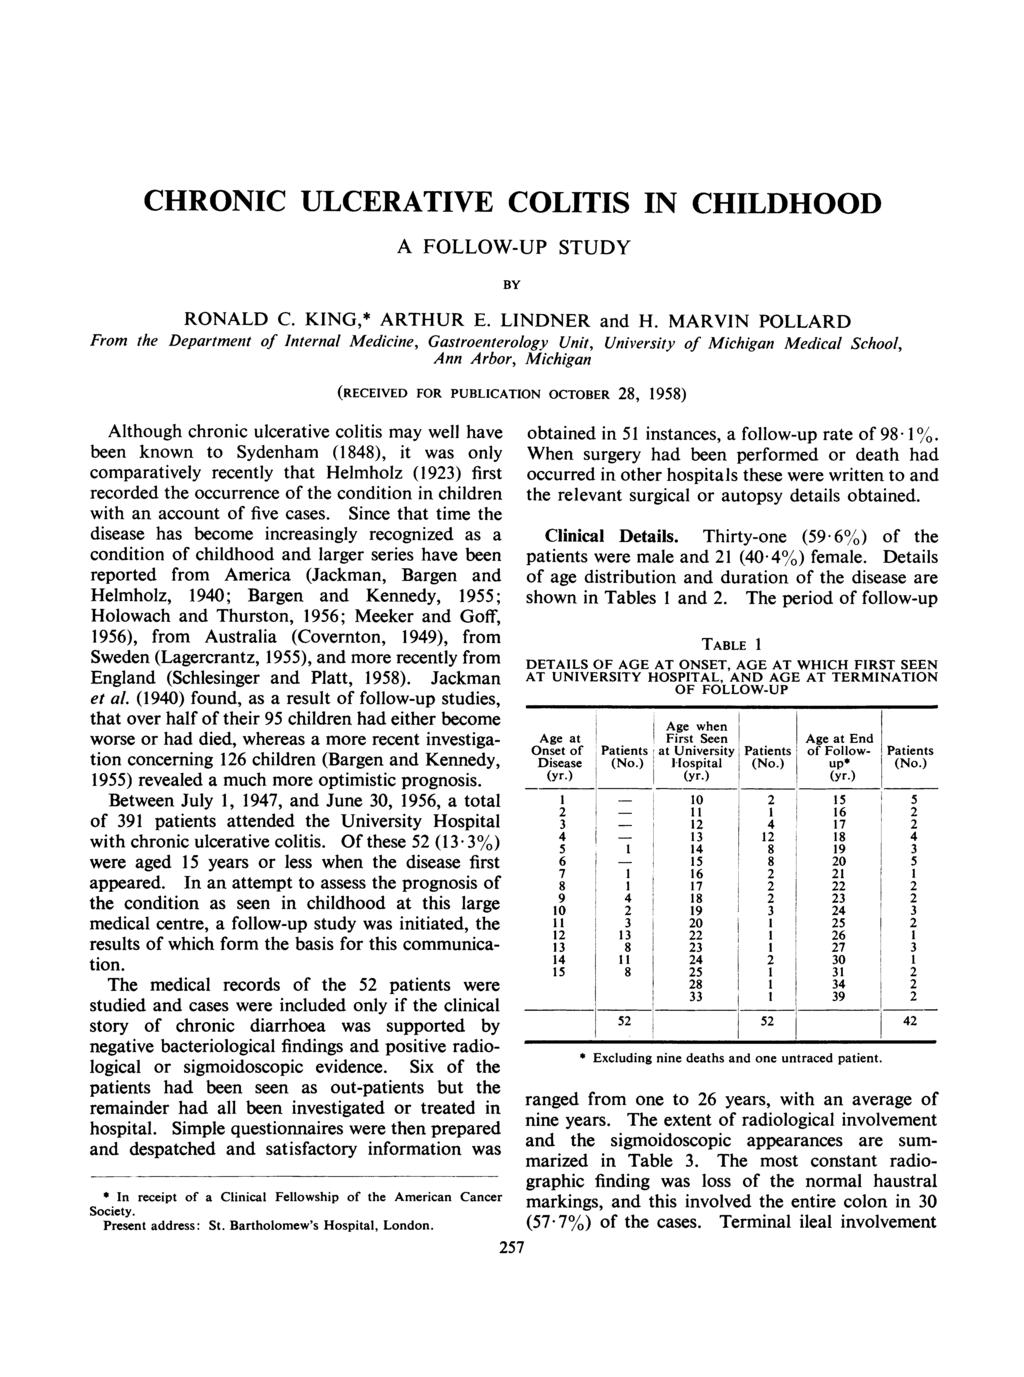 CHRONIC ULCERATIVE COLITIS IN CHILDHOOD A FOLLOW-UP STUDY RONALD C. KING,* ARTHUR E. LINDNER and H.